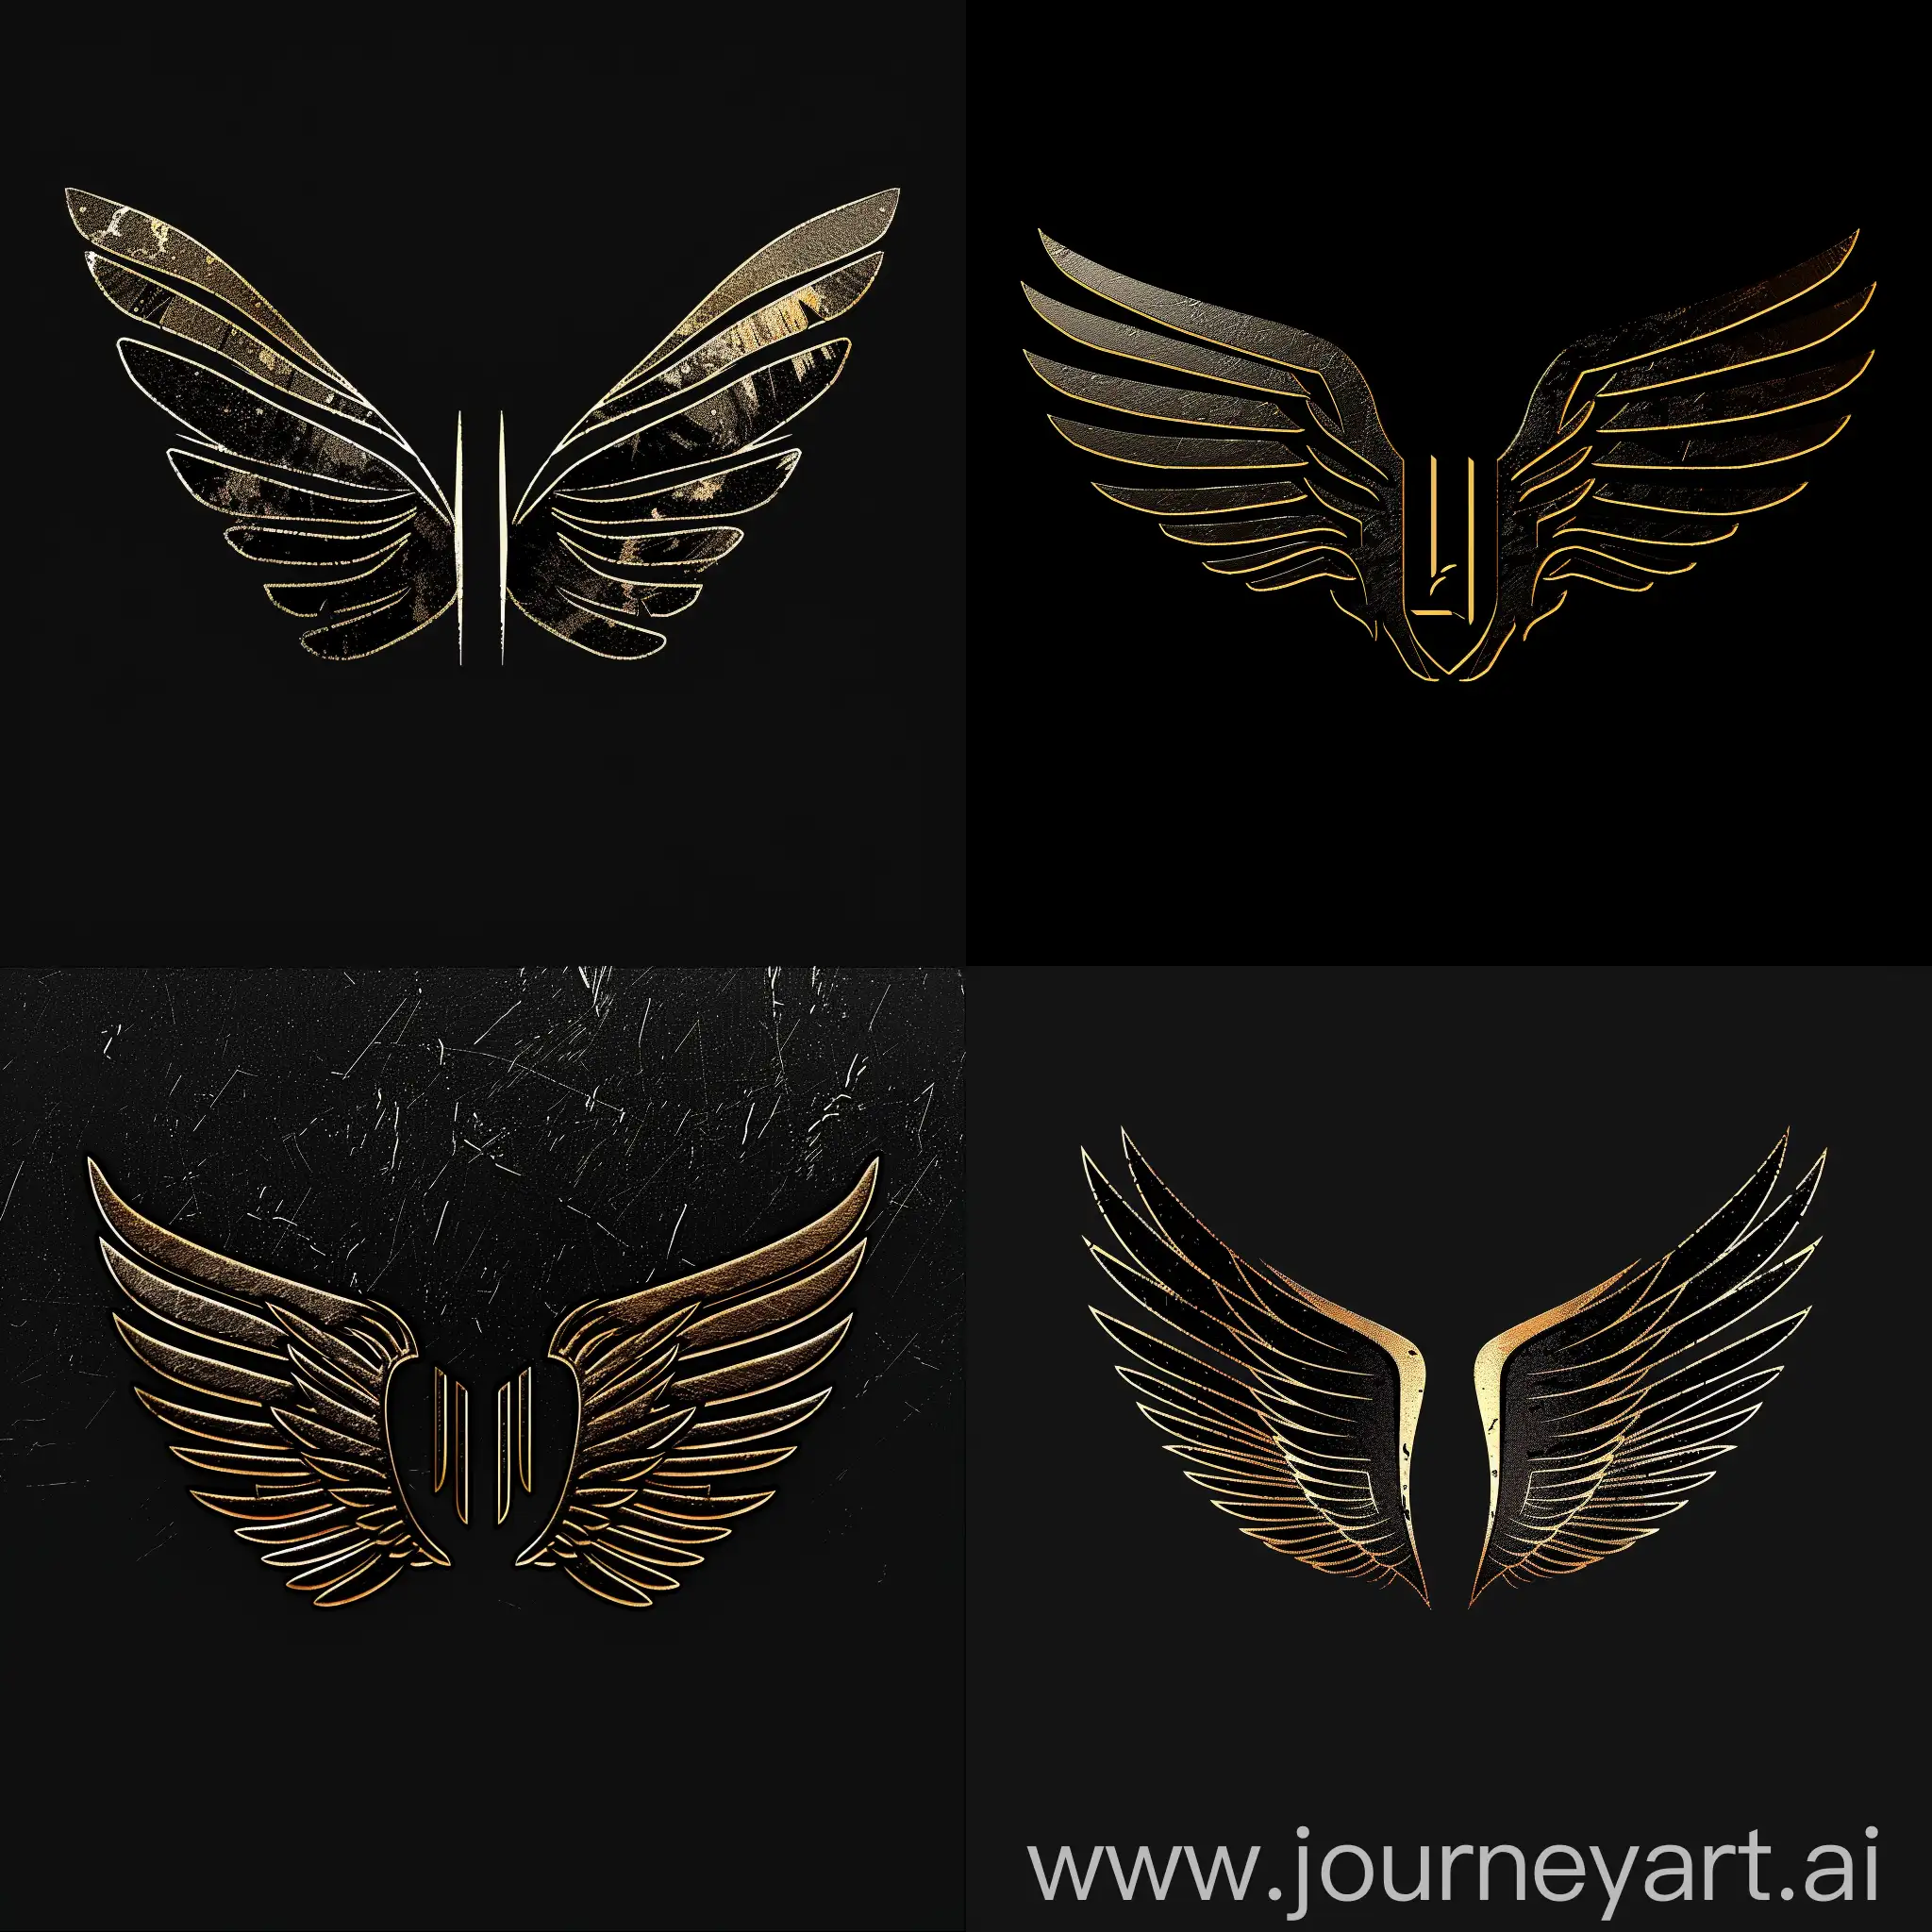 Please edit the provided logo to keep the original design intact, but replace all black areas with a metallic gold texture. Make sure the metallic effect has realistic shine and reflections, giving the logo a sophisticated and premium look. The design of the wings and all the details must be preserved with the new golden texture.